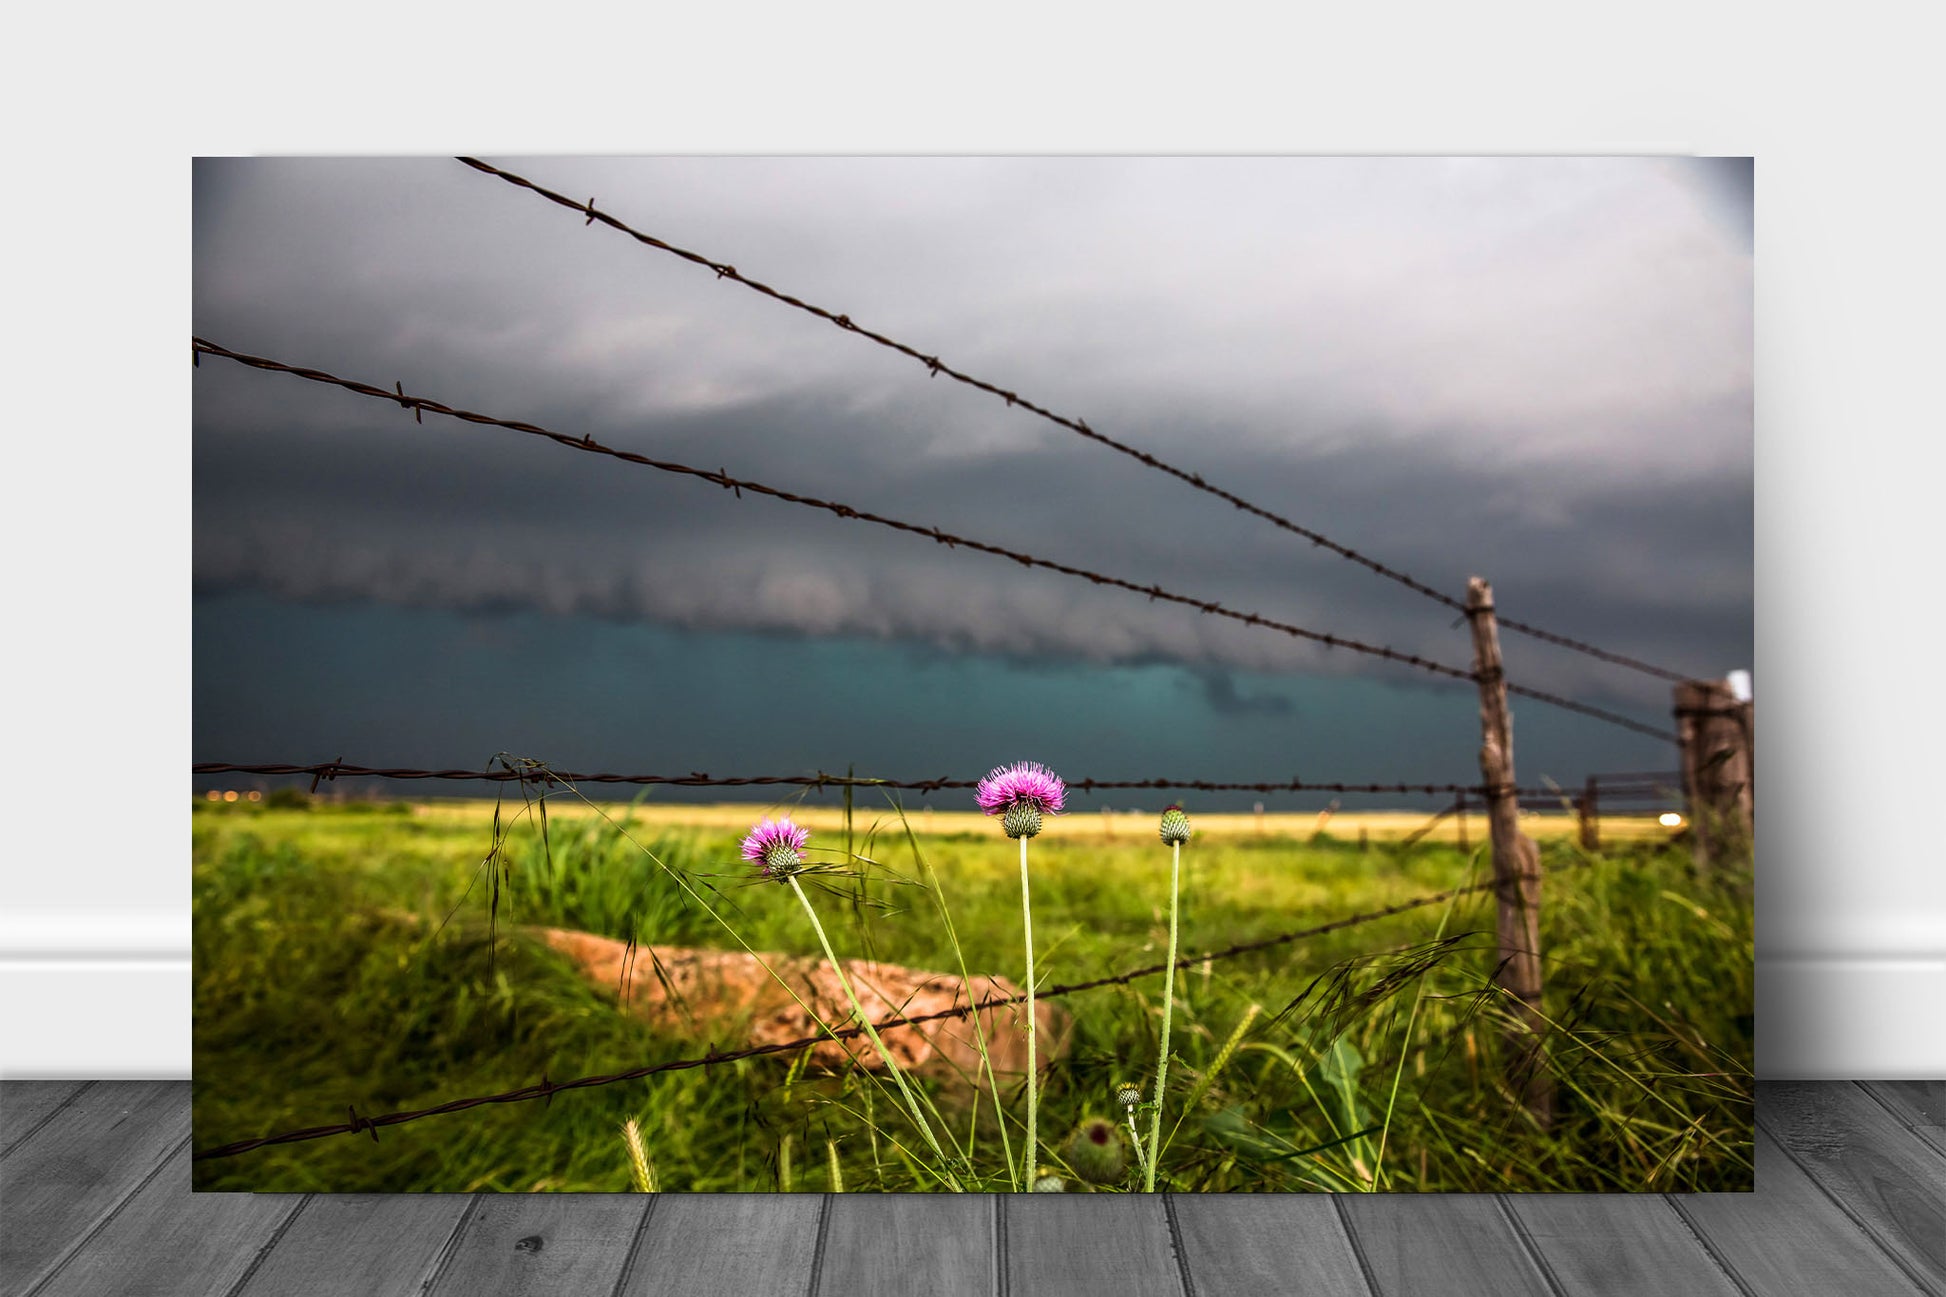 Country metal print on aluminum of pink thistle flowers and a barbed wire fence as a storm approaches on a spring day in Texas by Sean Ramsey of Southern Plains Photography.